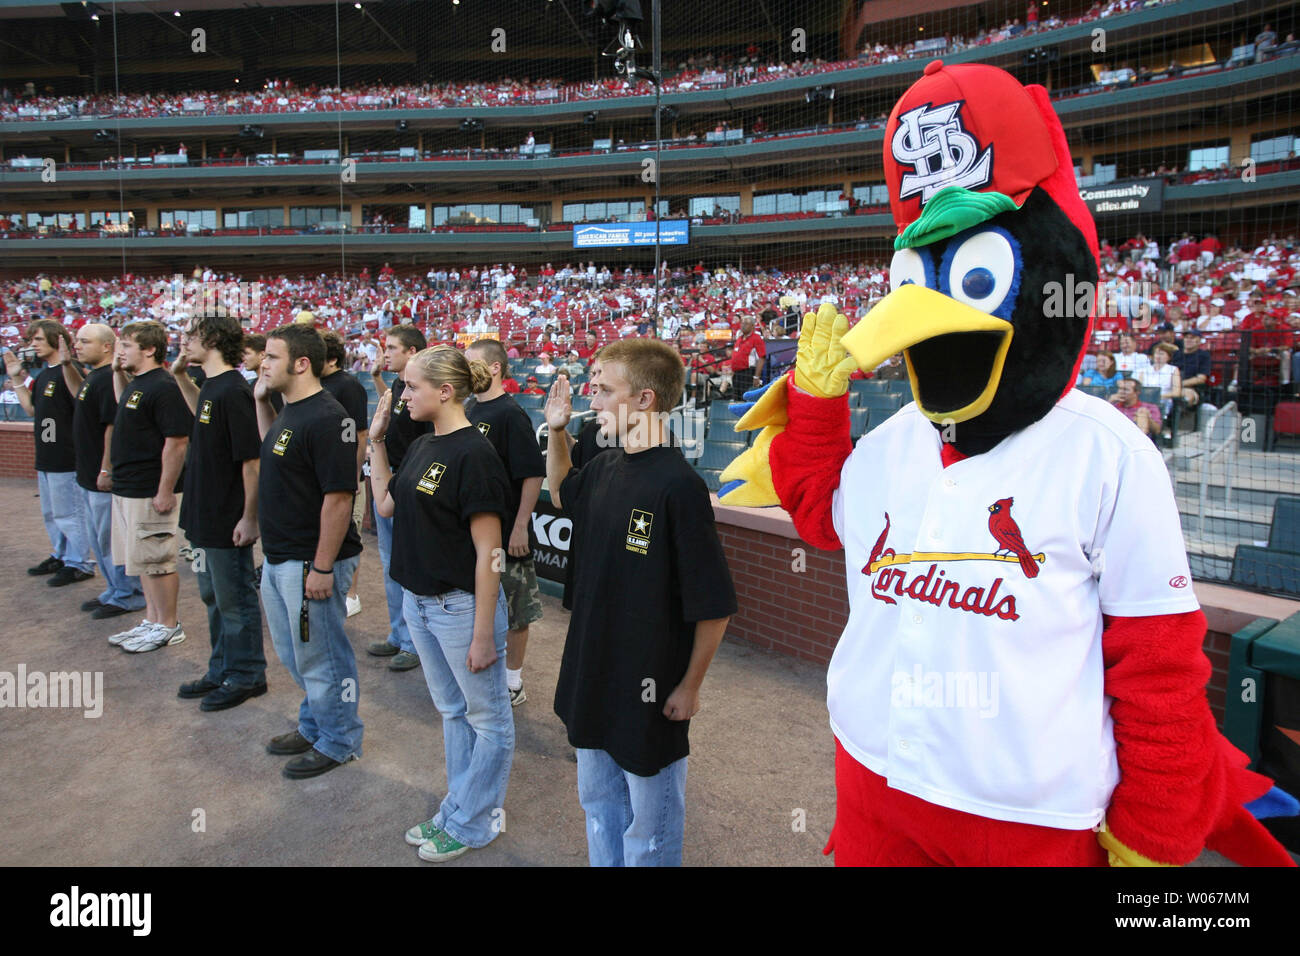 St Louis Cardinals Fredbird Mascot t-shirt by To-Tee Clothing - Issuu